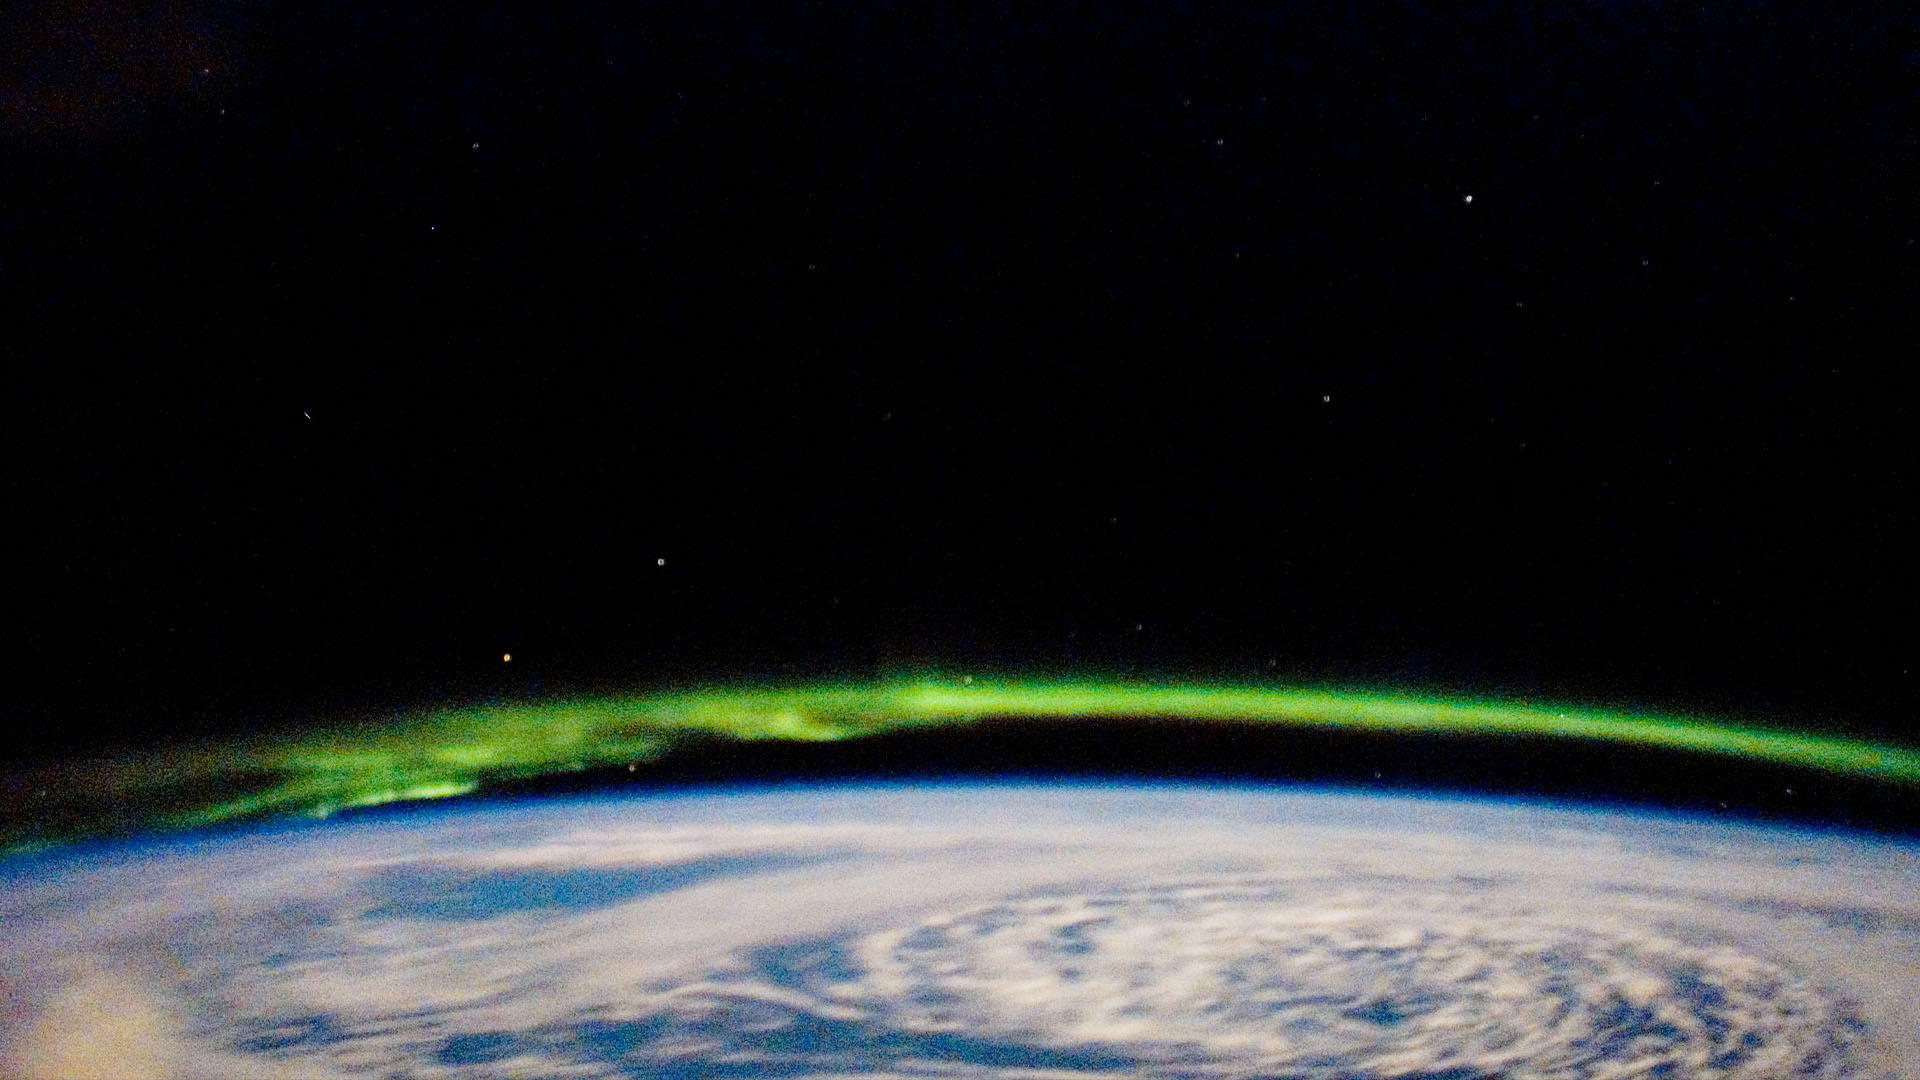 Green aurora taken over the surface of the earth against the black sky of space from the International Space Station.